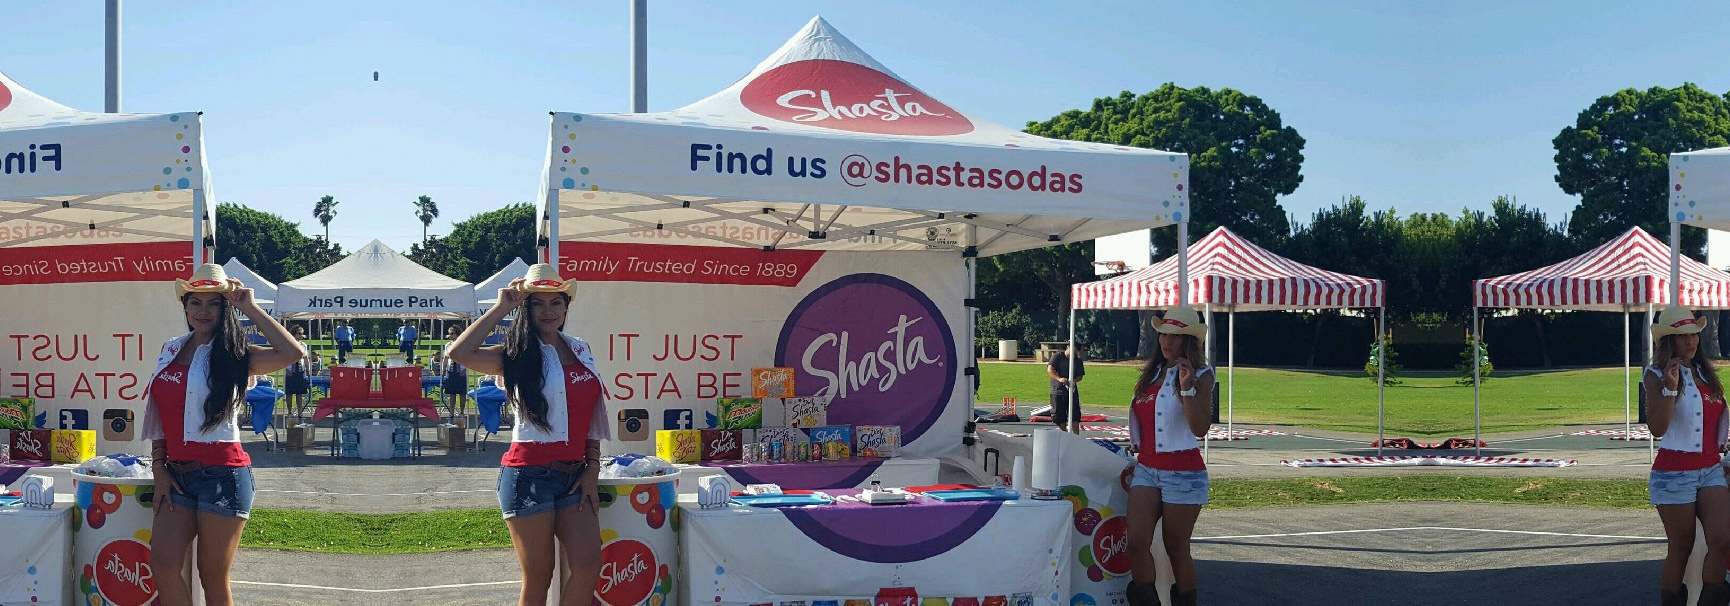 shasta soda gold package custom canopy installed at an event with multiple other canopies